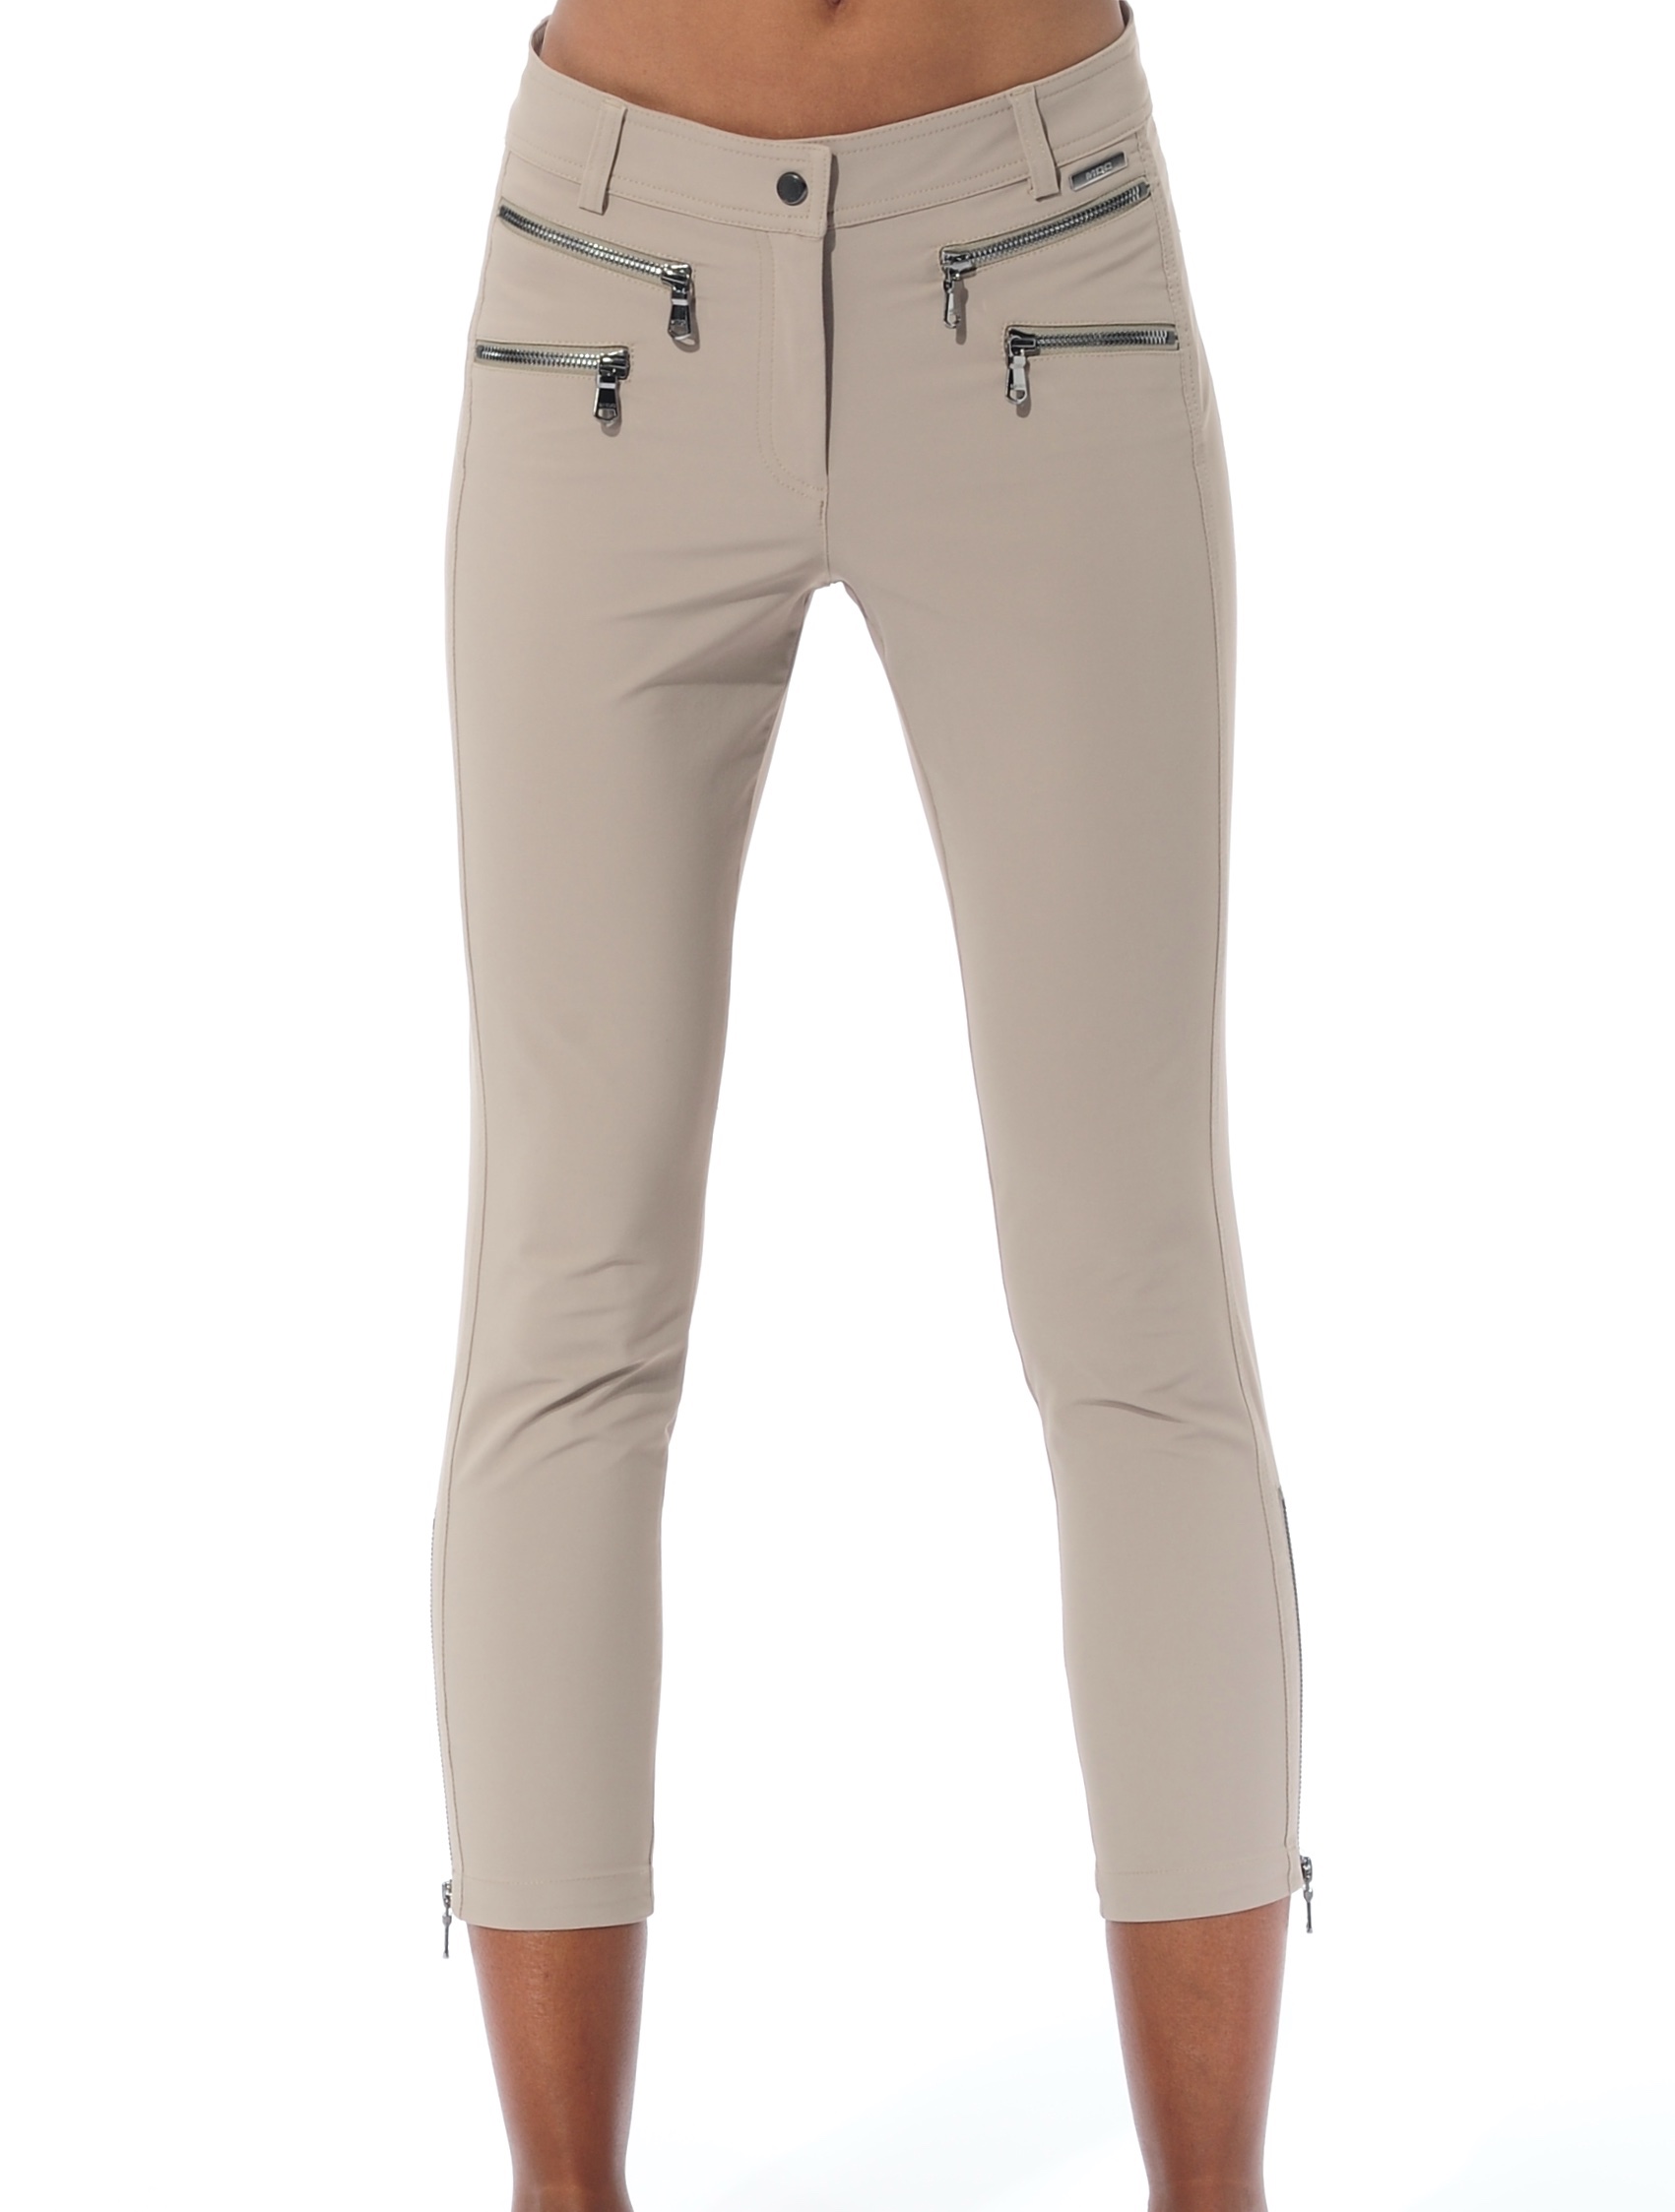 4way stretch double zip cropped pants taupe 